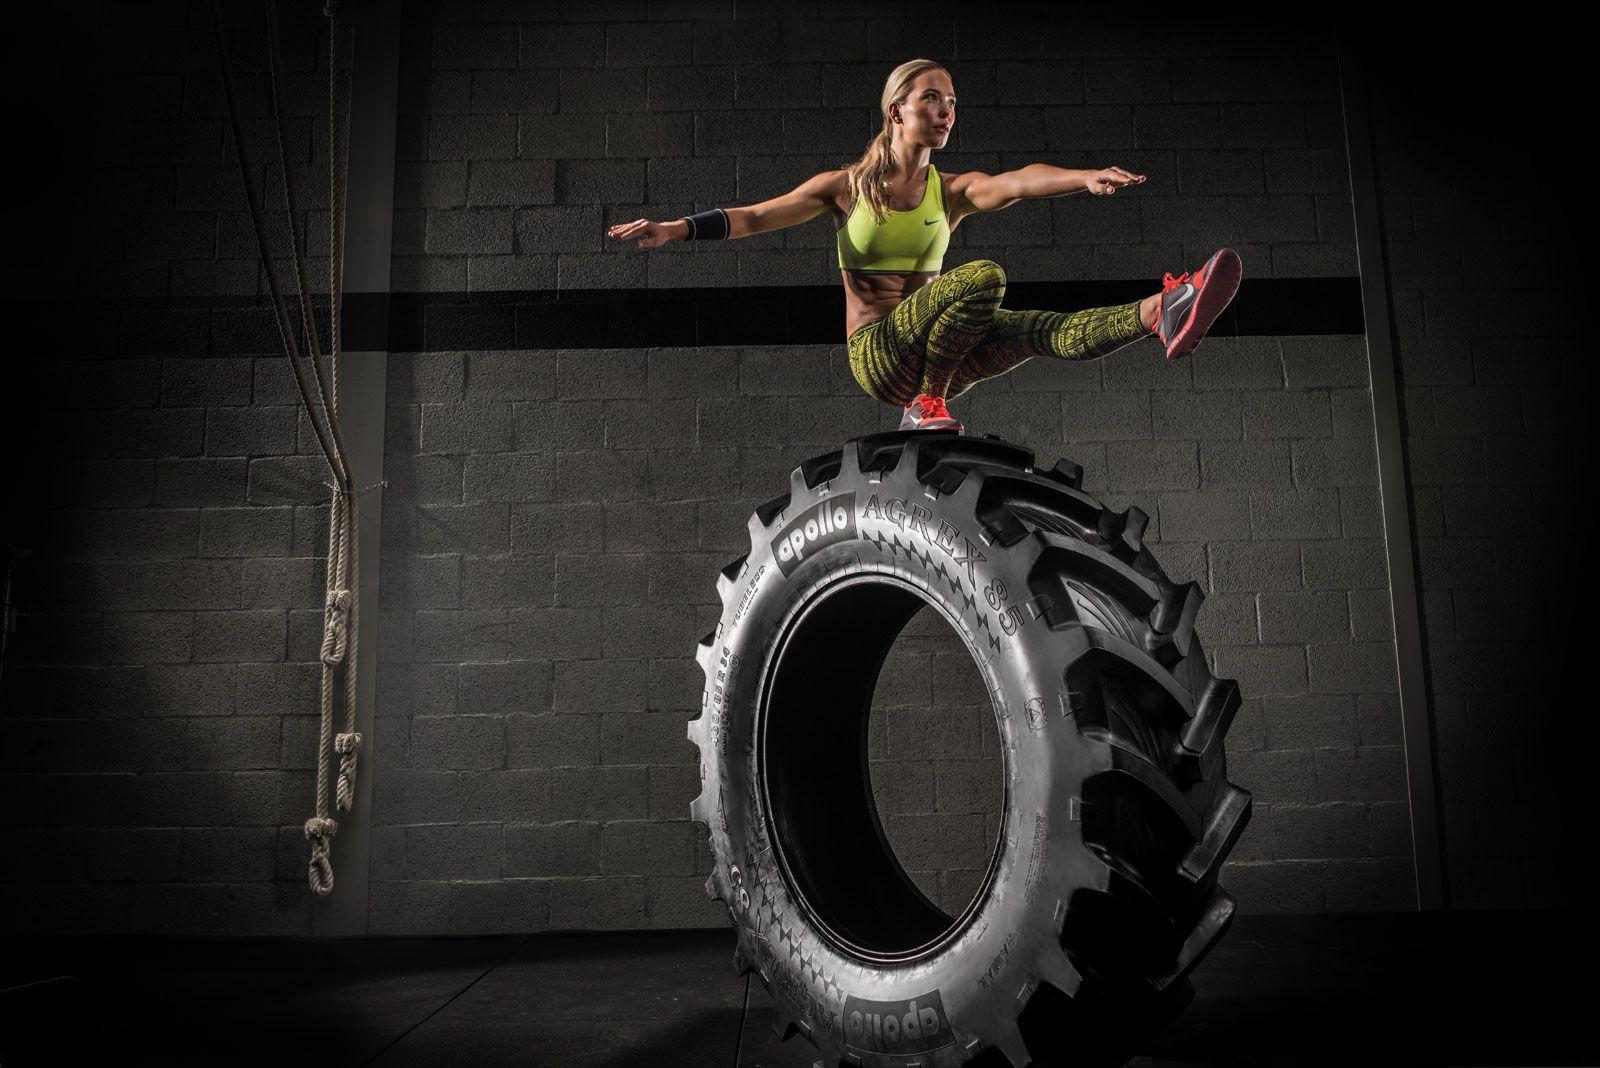 Collection of Crossfit Wallpaper on HDWallpaper